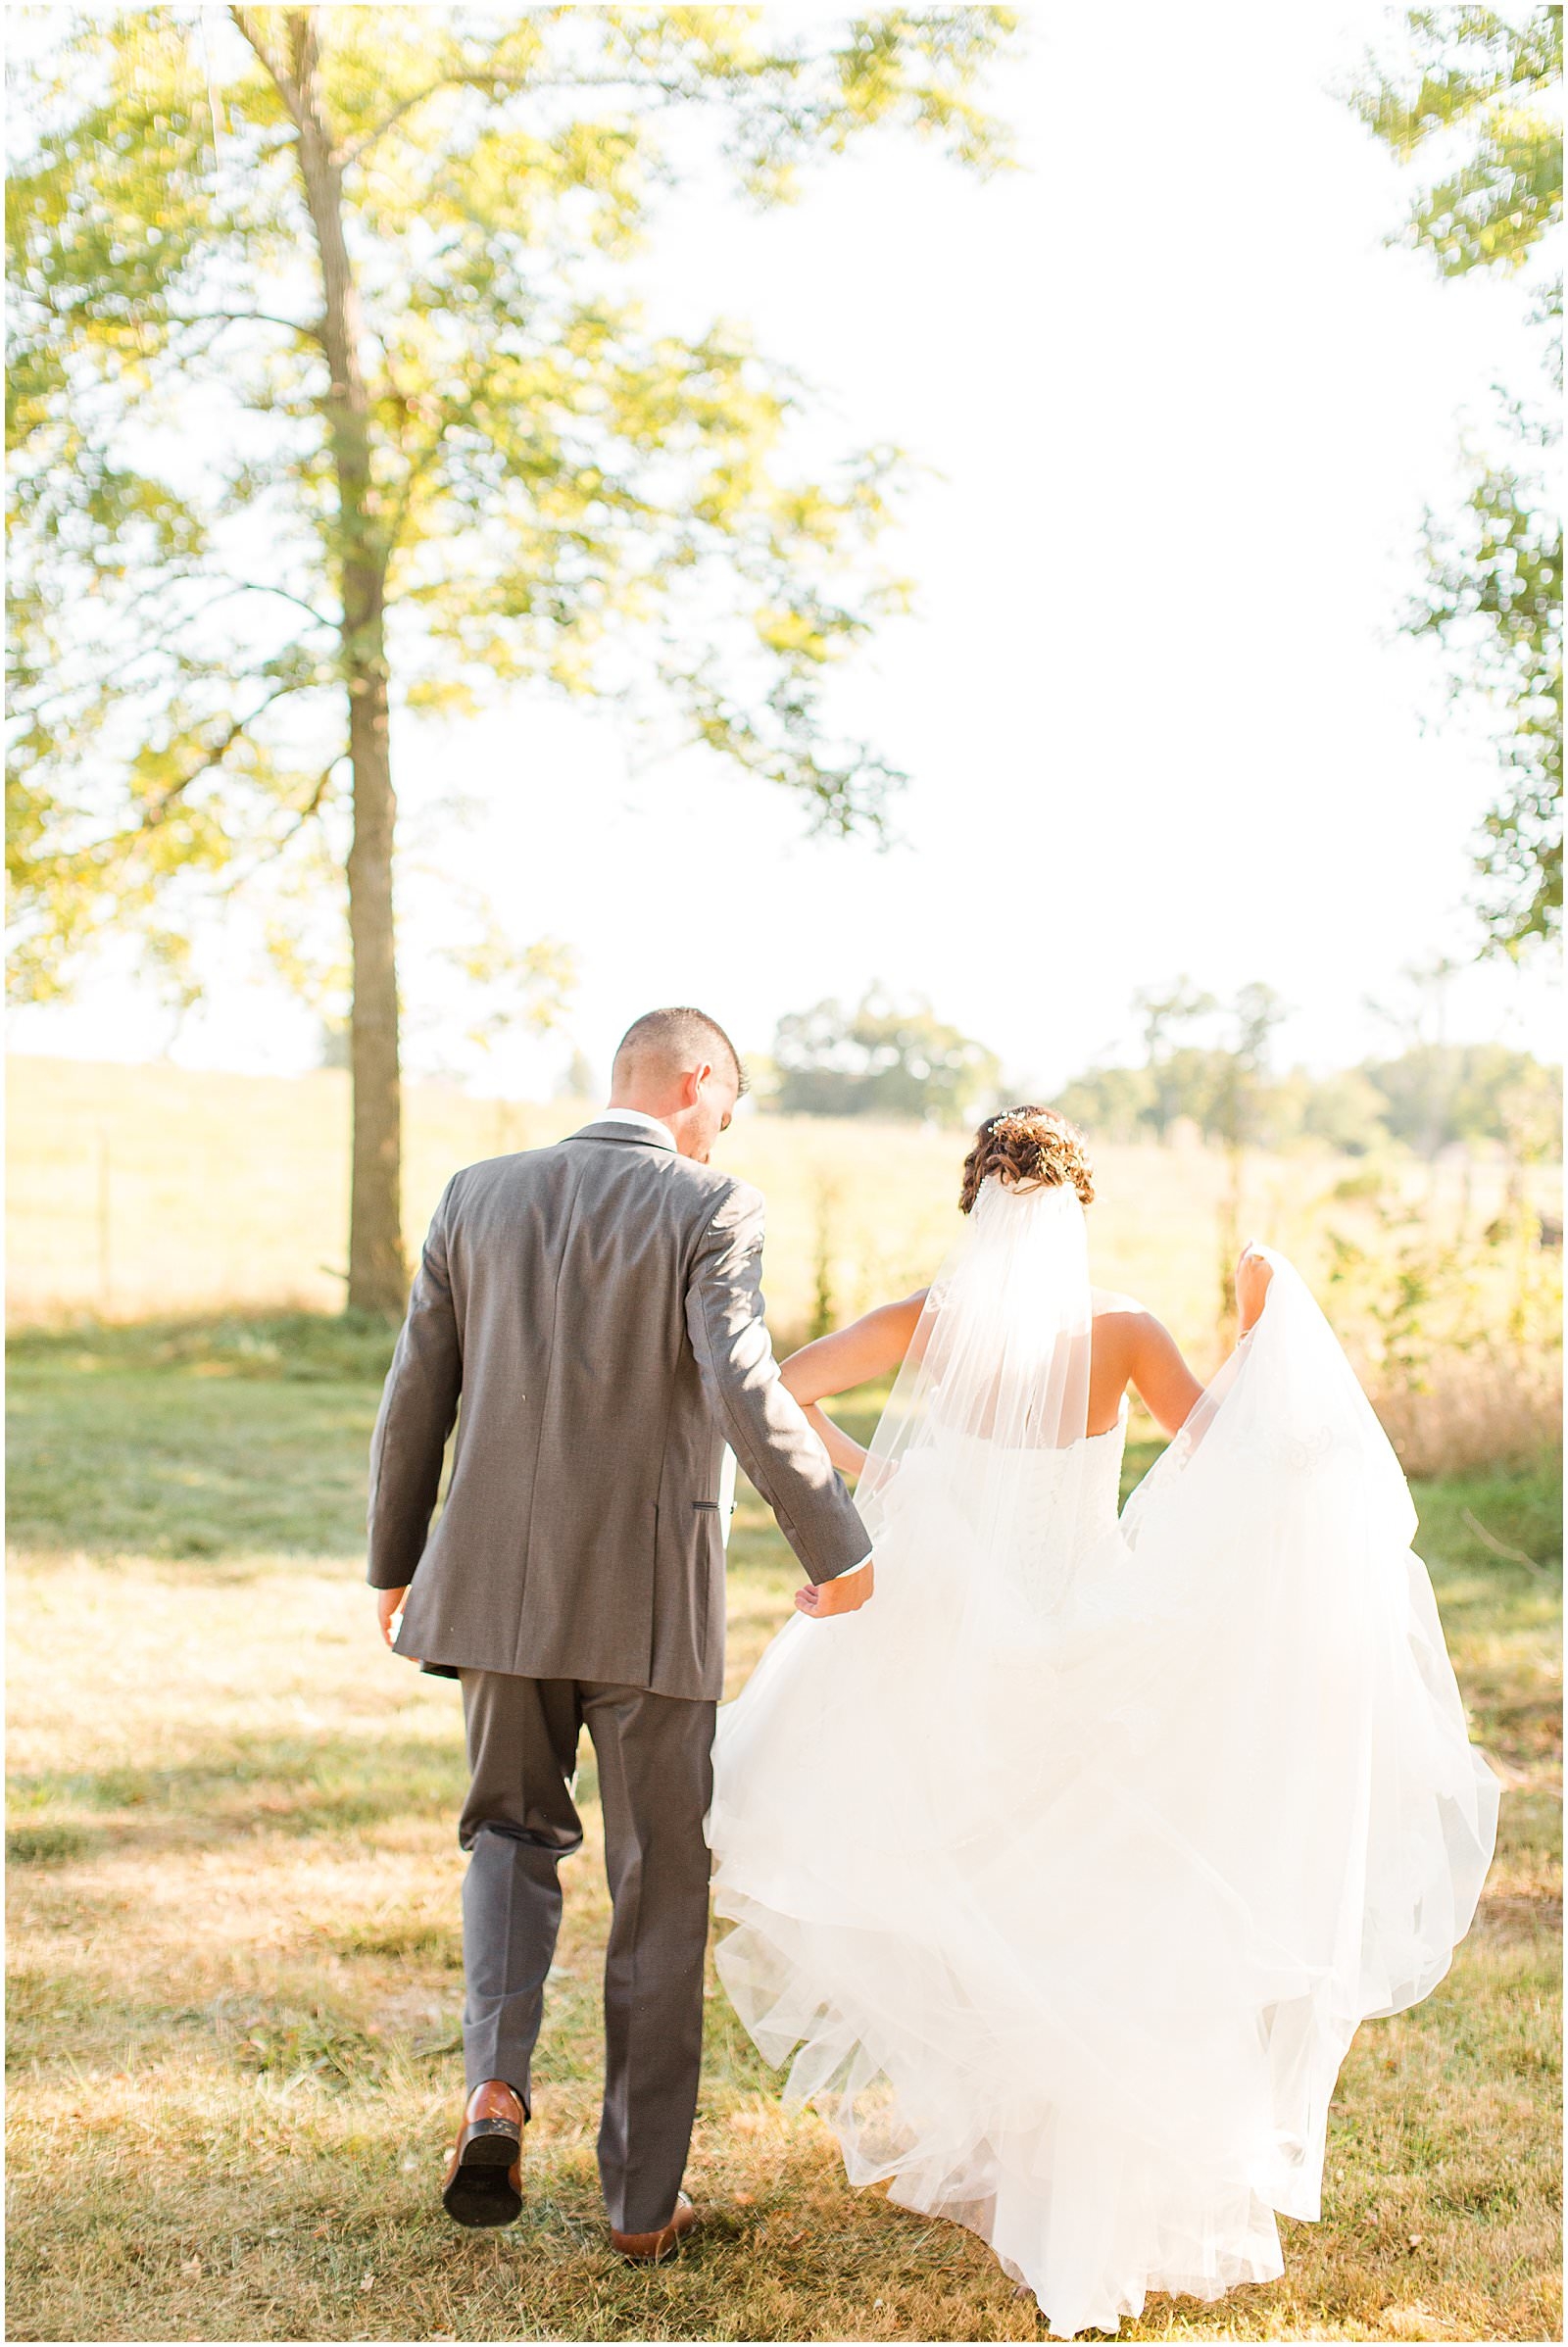 A Stunning Fall Wedding in Indianapolis, IN |. Sally and Andrew | Bret and Brandie Photography 0132.jpg